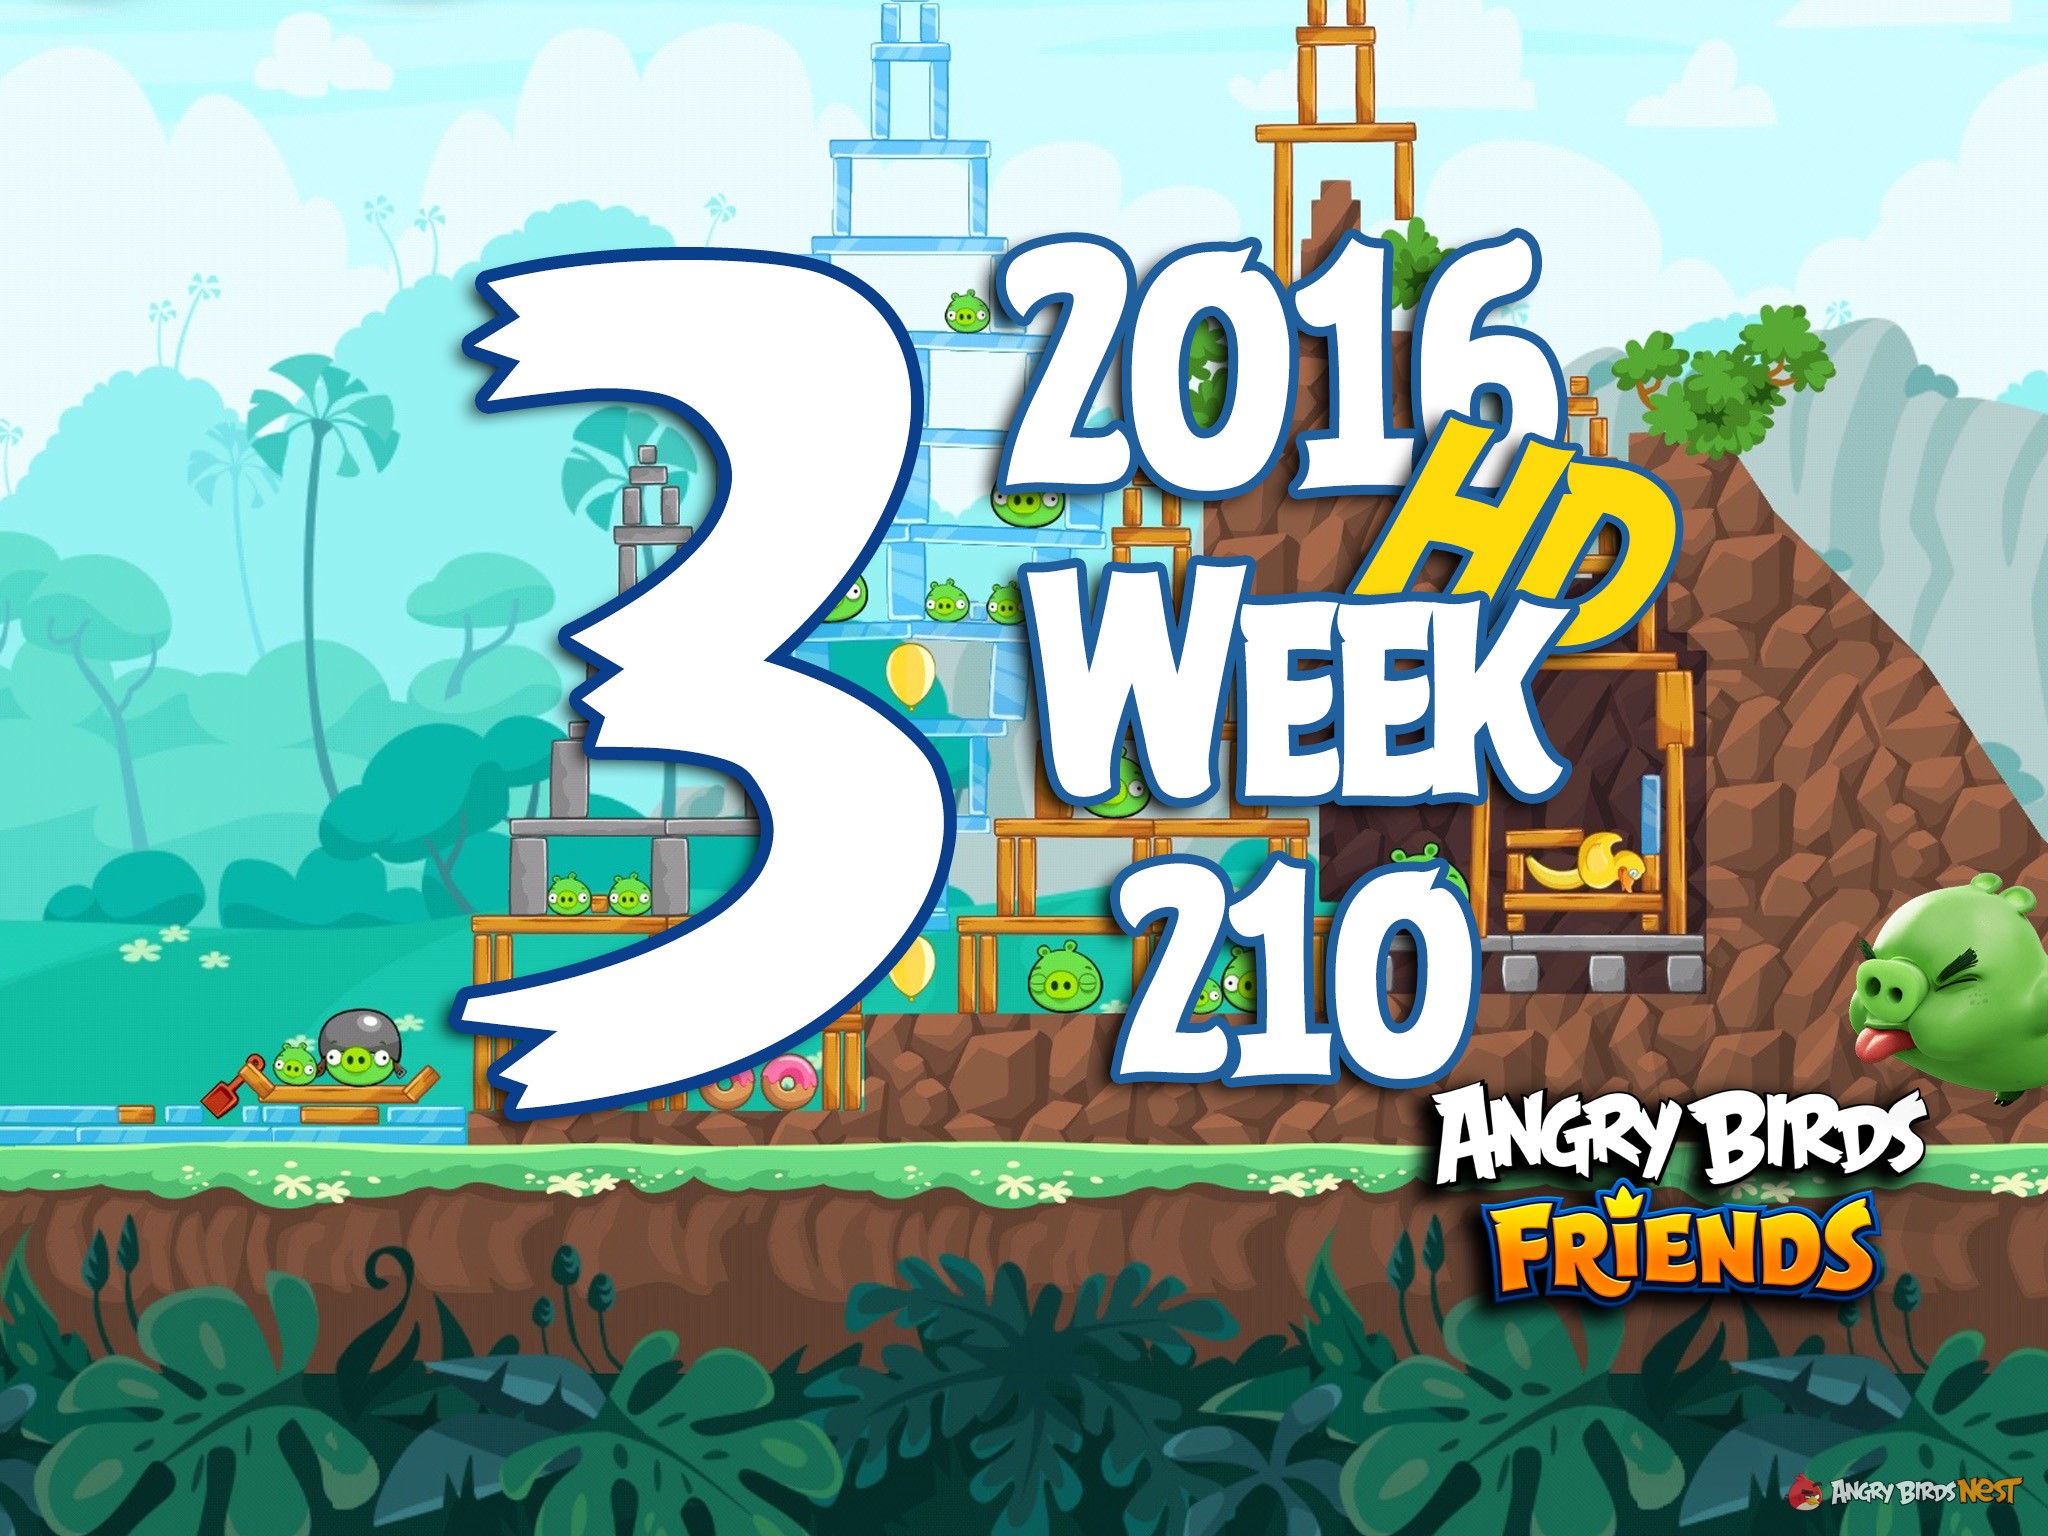 Angry Birds Friends Tournament Level 3 Week 210 Walkthrough | May 26th 2016